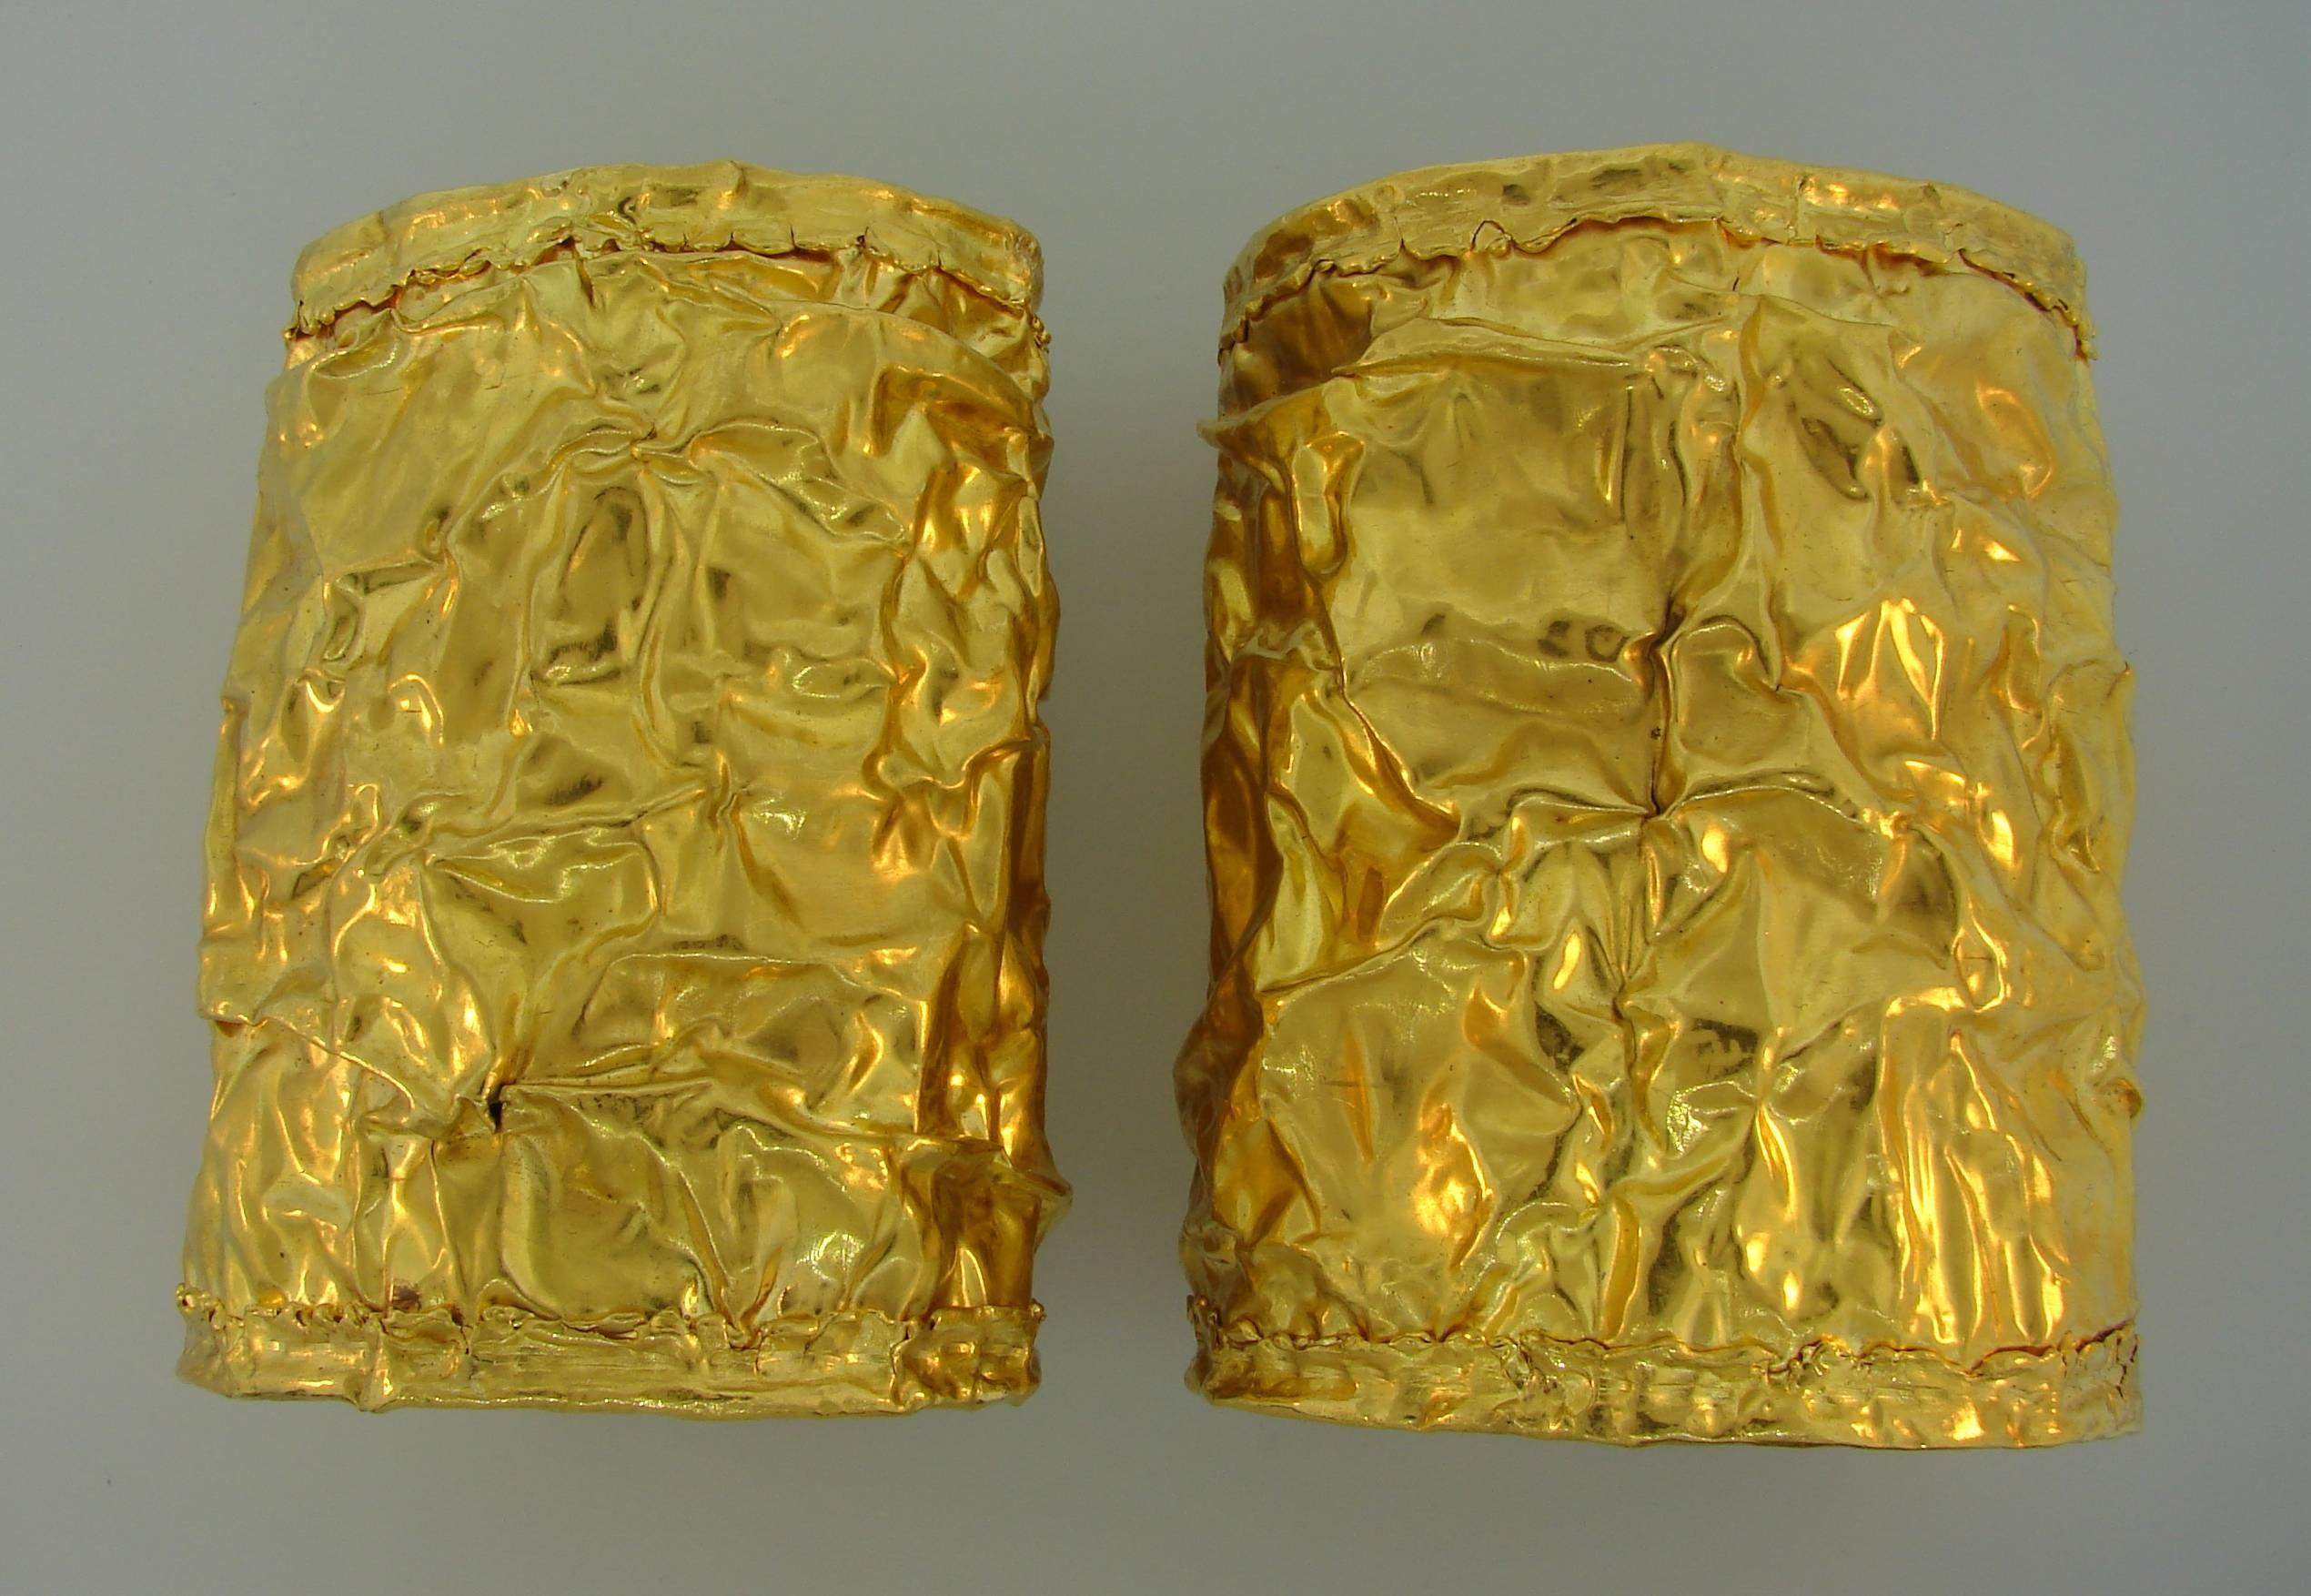 A pair of stunning 22 karat gold cuff bracelets that make your feel like Cleopatra. The cuffs are 3-3/4 inches (9.8 cm) long and weigh 362.2 grams. They would perfectly fit up to 7-inch wrist. 